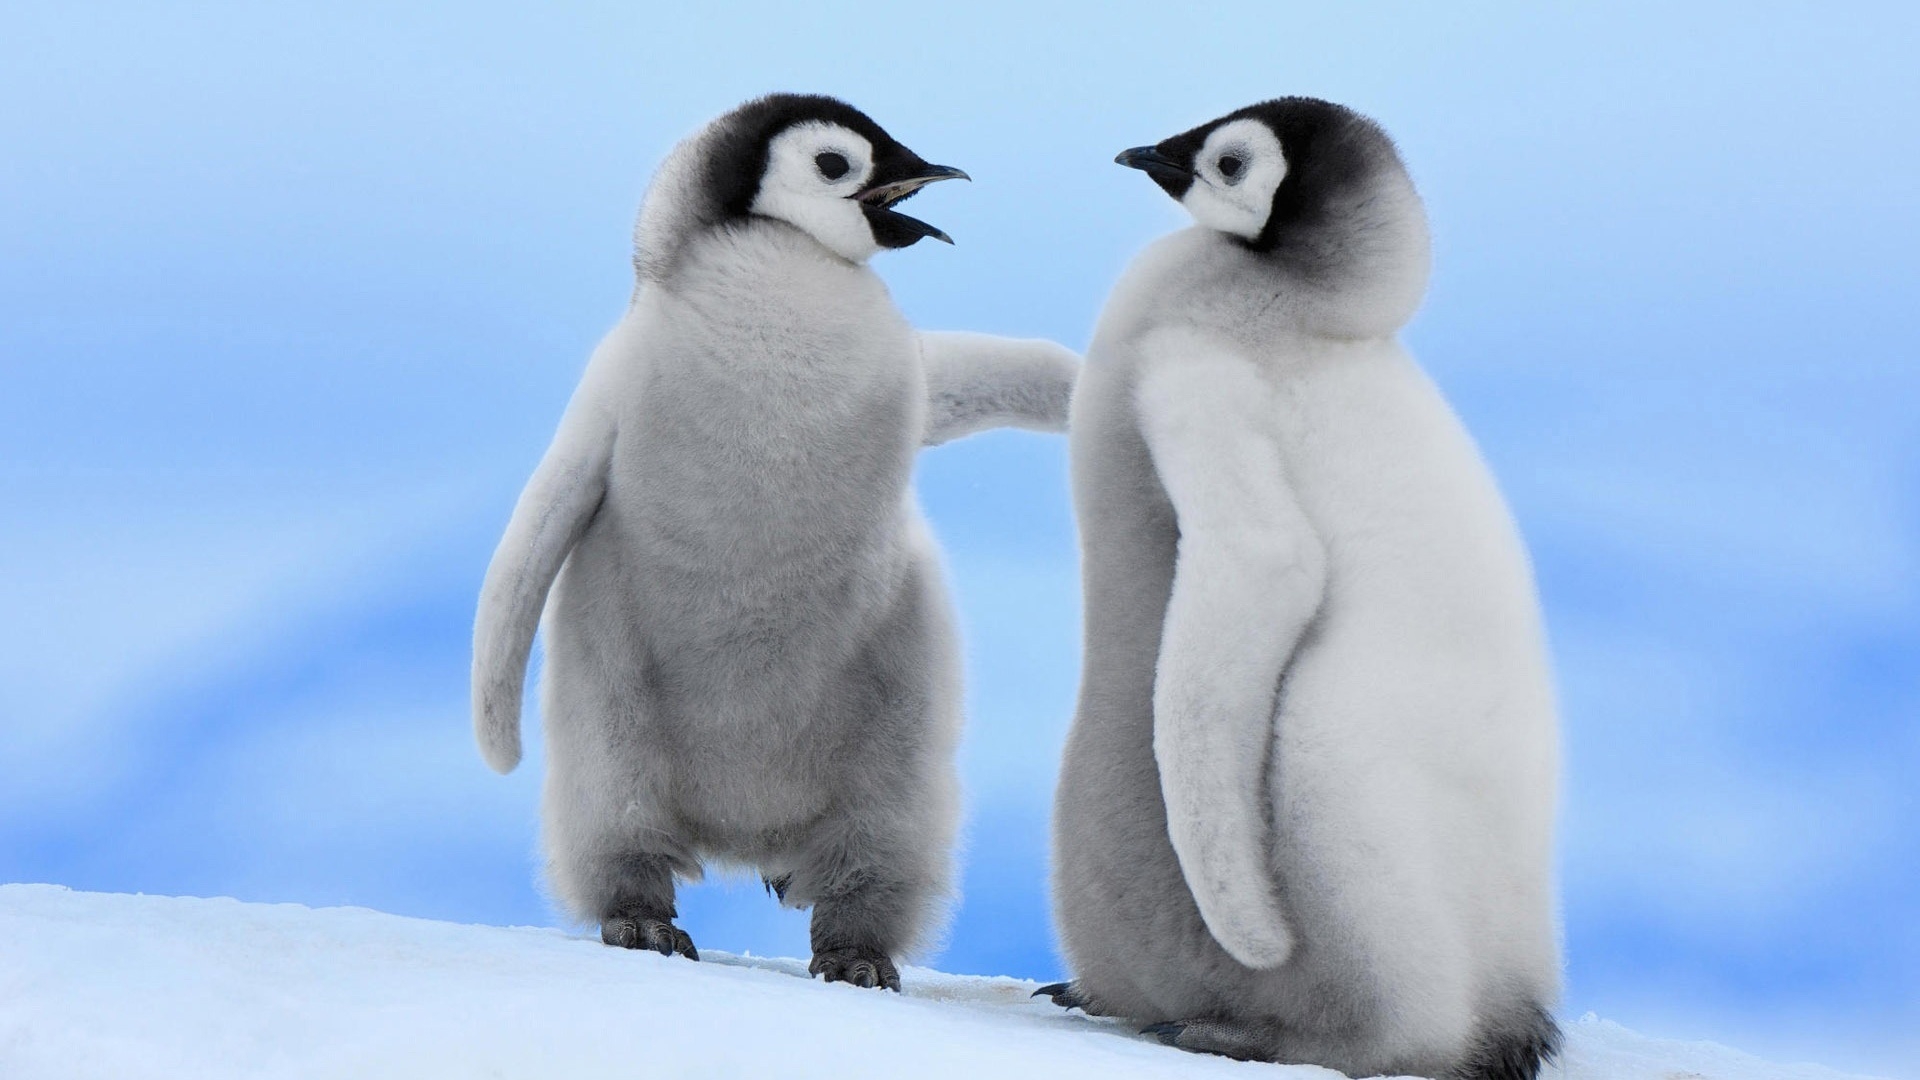 Cute Baby Penguins for 1920 x 1080 HDTV 1080p resolution